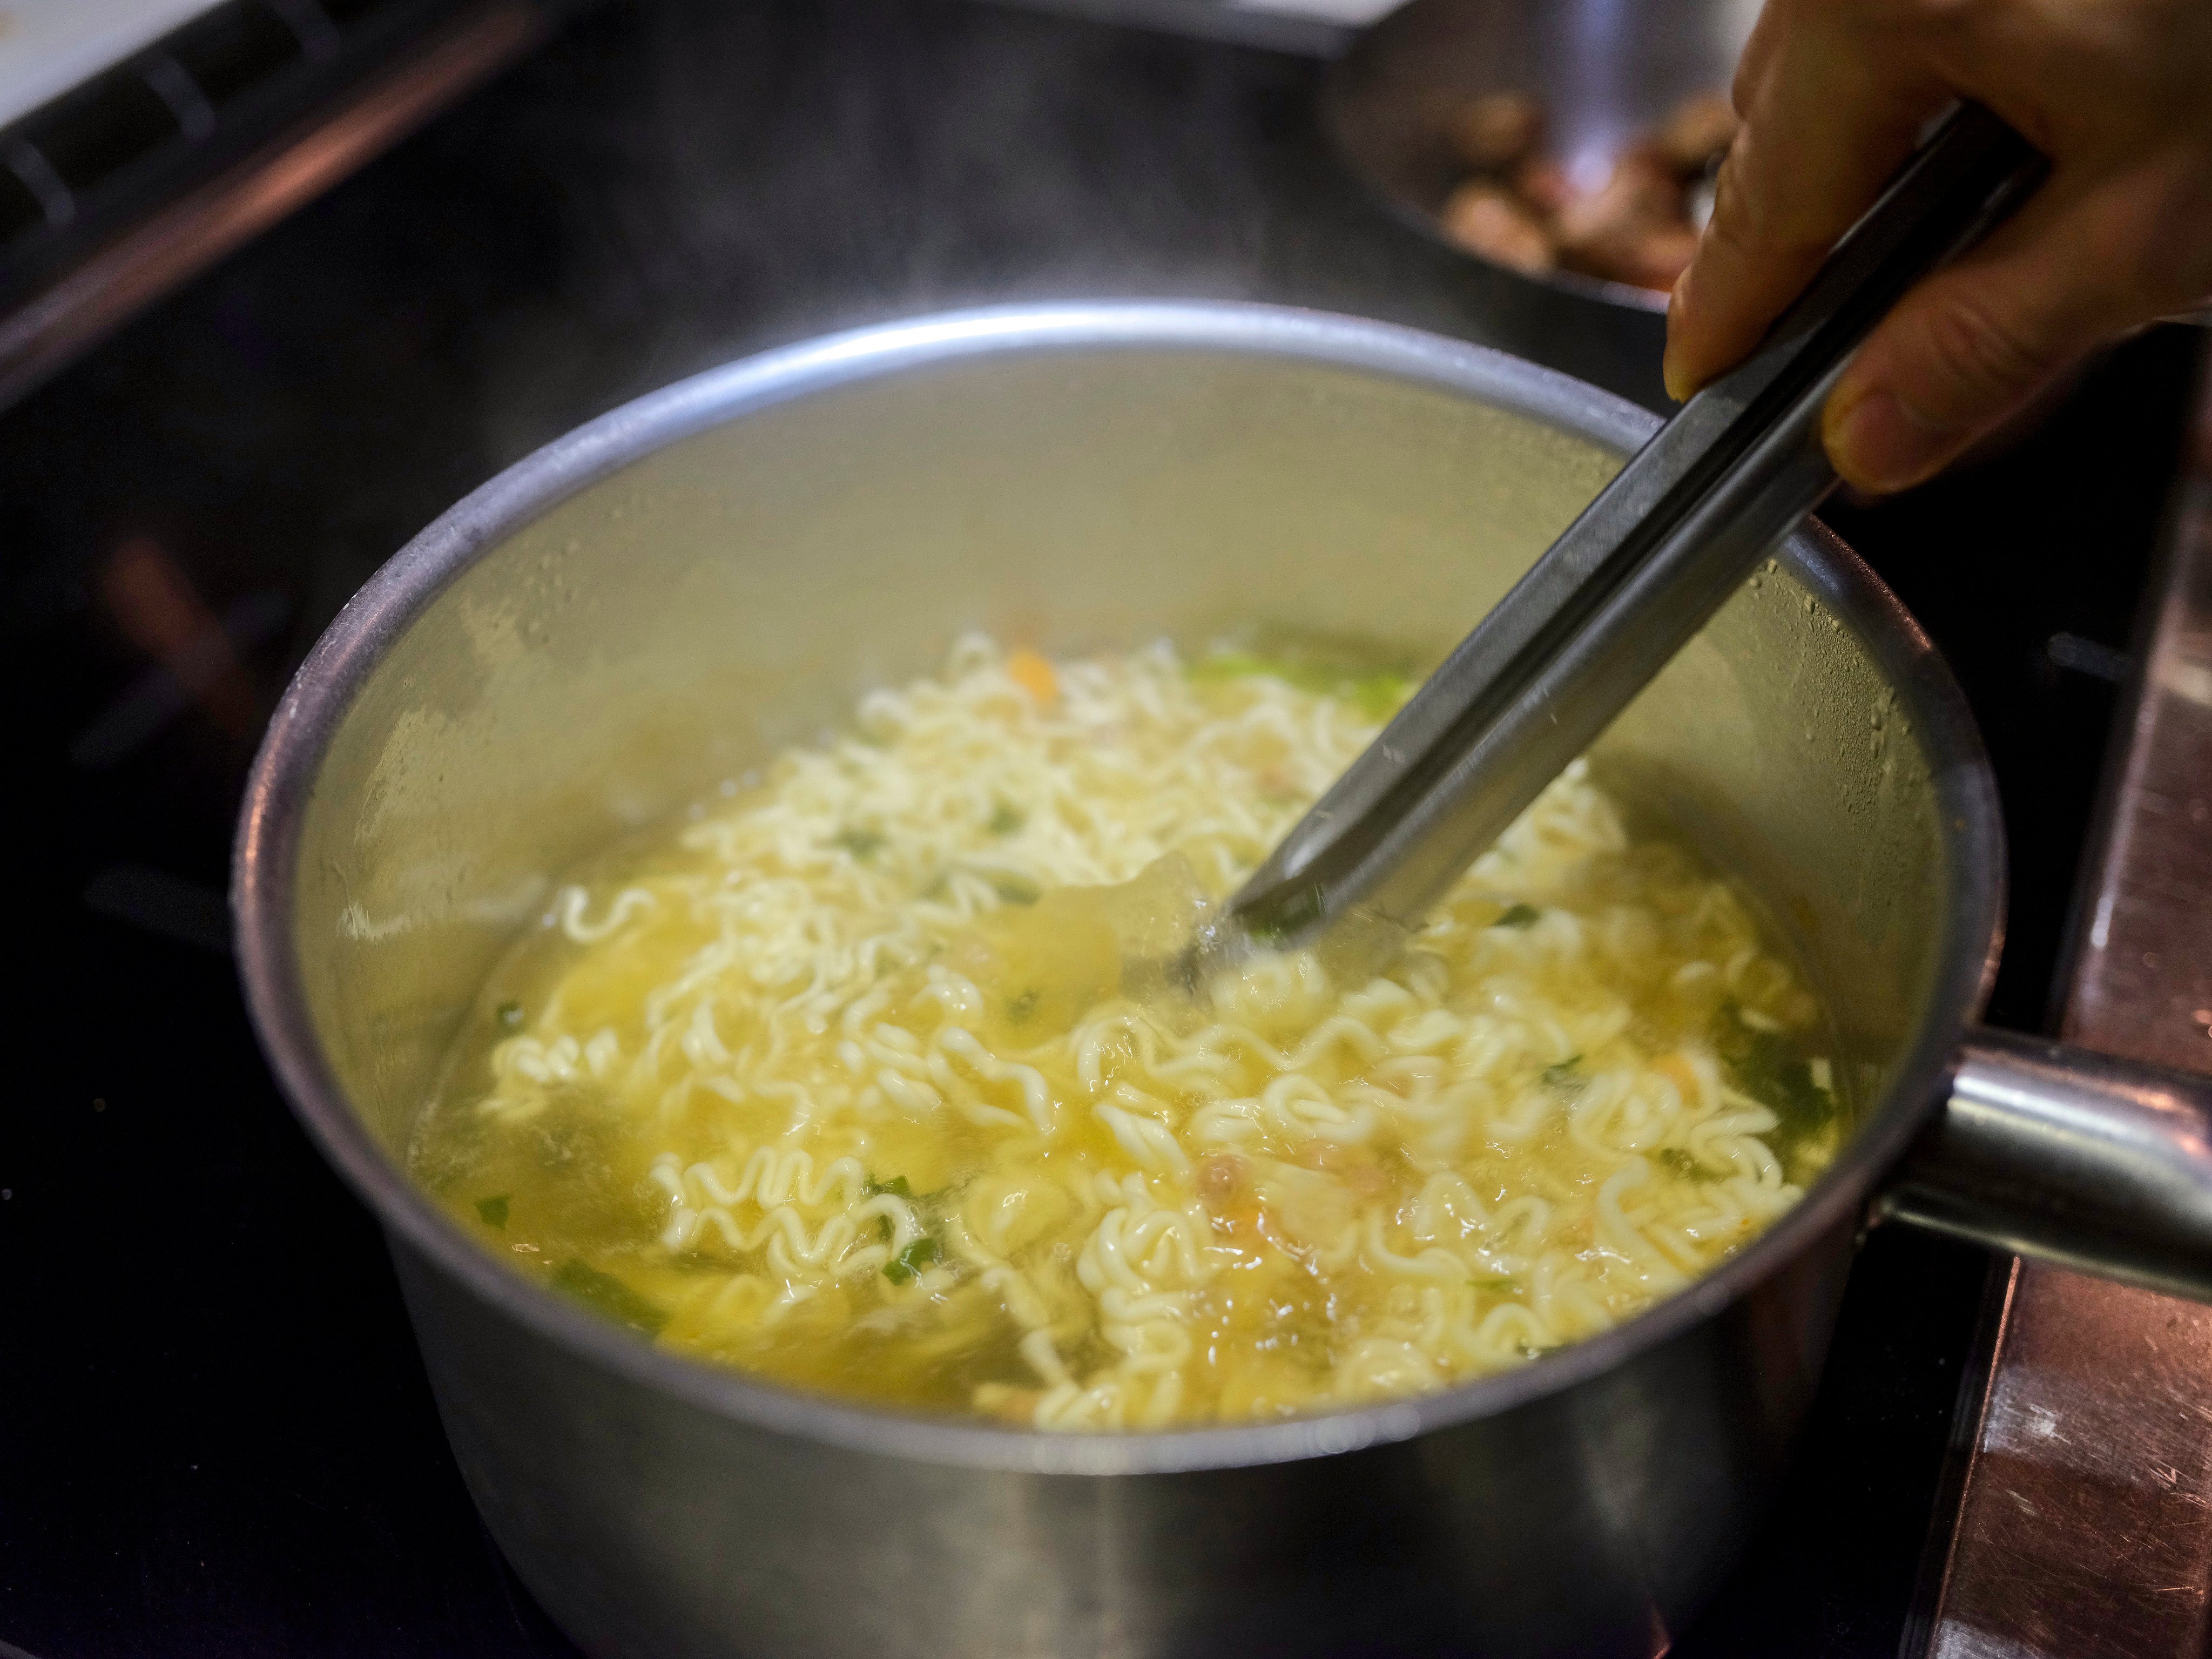 Hong Kong’s love of instant noodles has surpassed even Japan, where the snack was first invented. Photo: Tory Ho